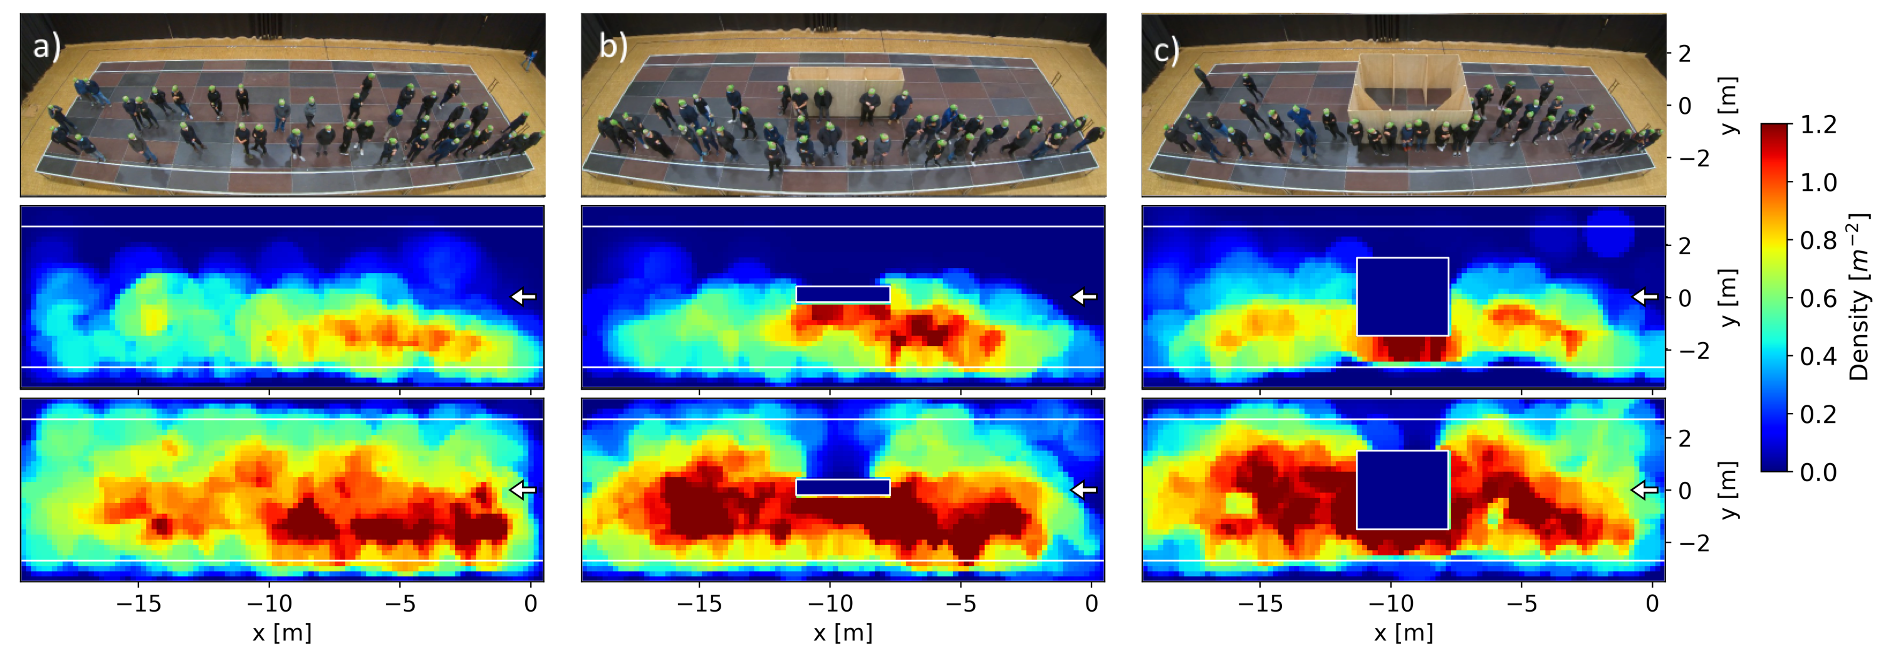 Upper panel: experiment setup for 40 participant showing their positions at the end of the waiting time; middle: density profiles for 2 minutes waiting time and 40 participants; lower panel: for 100 participants